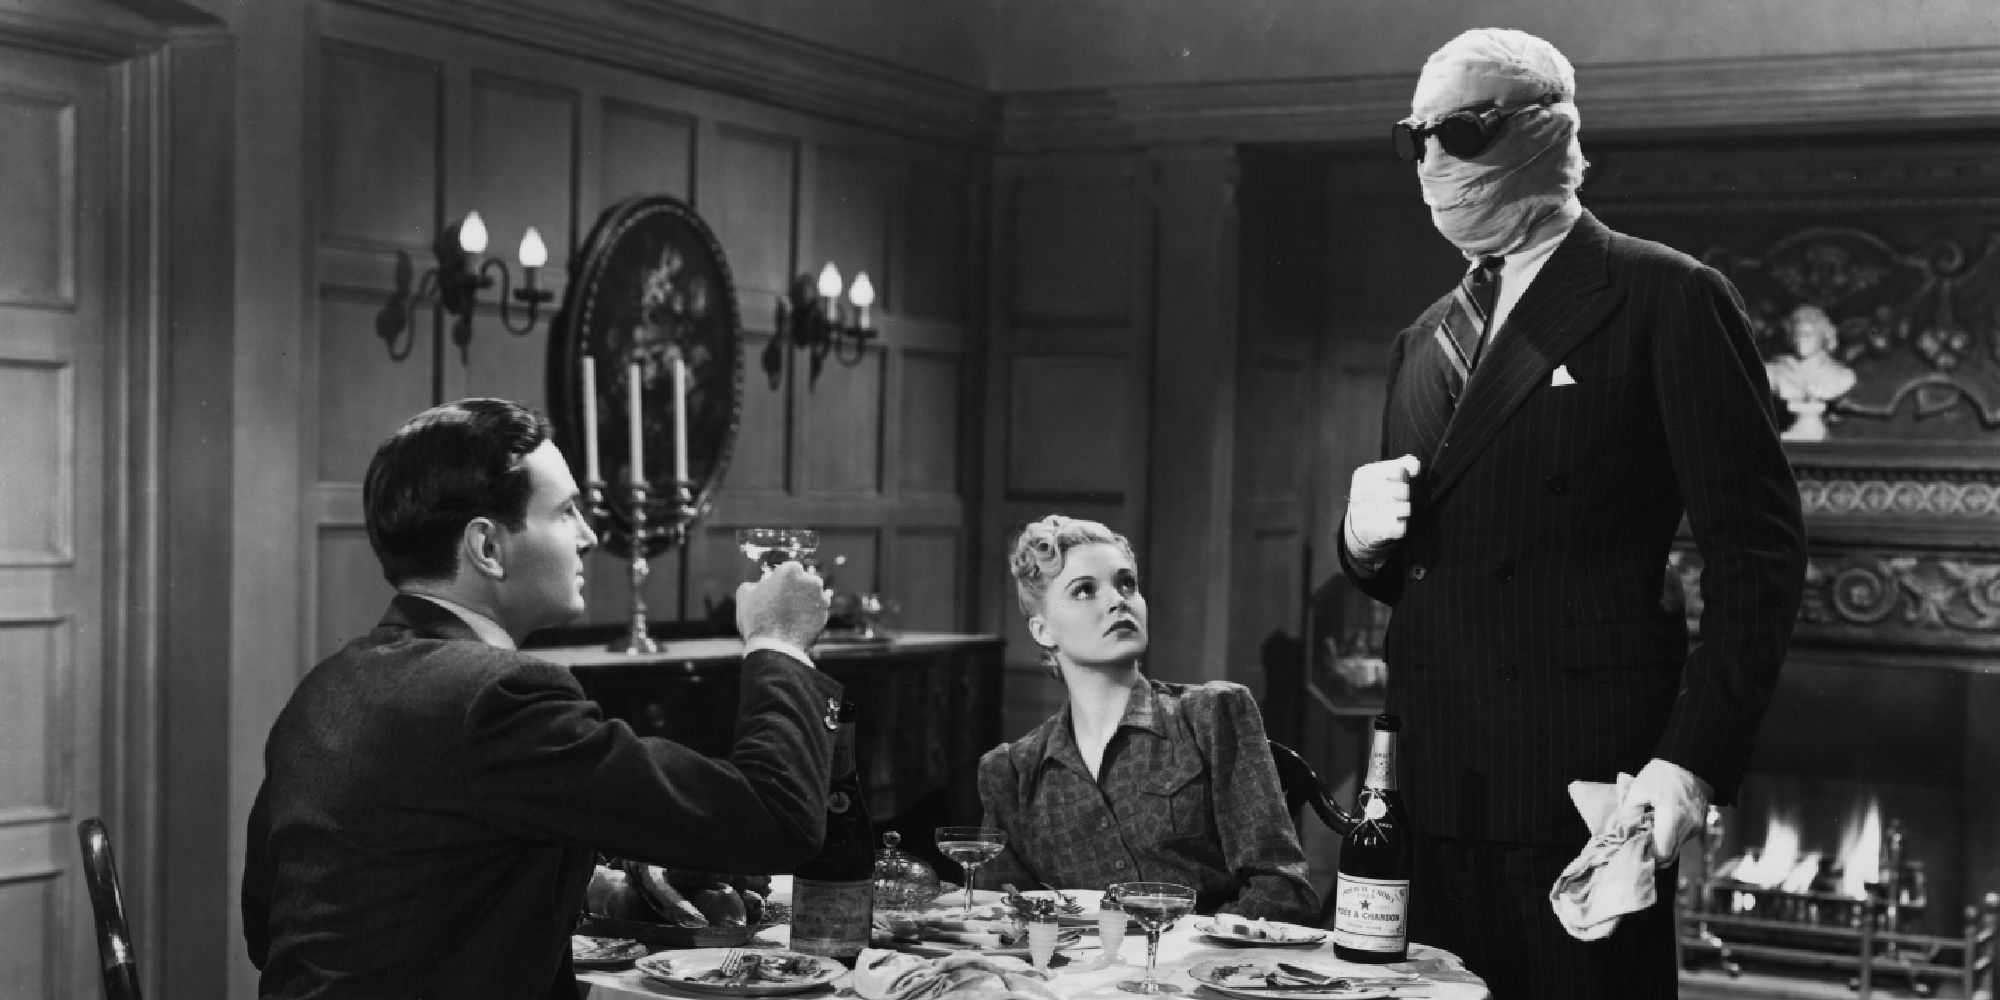 The Invisible Man Returns - 1940